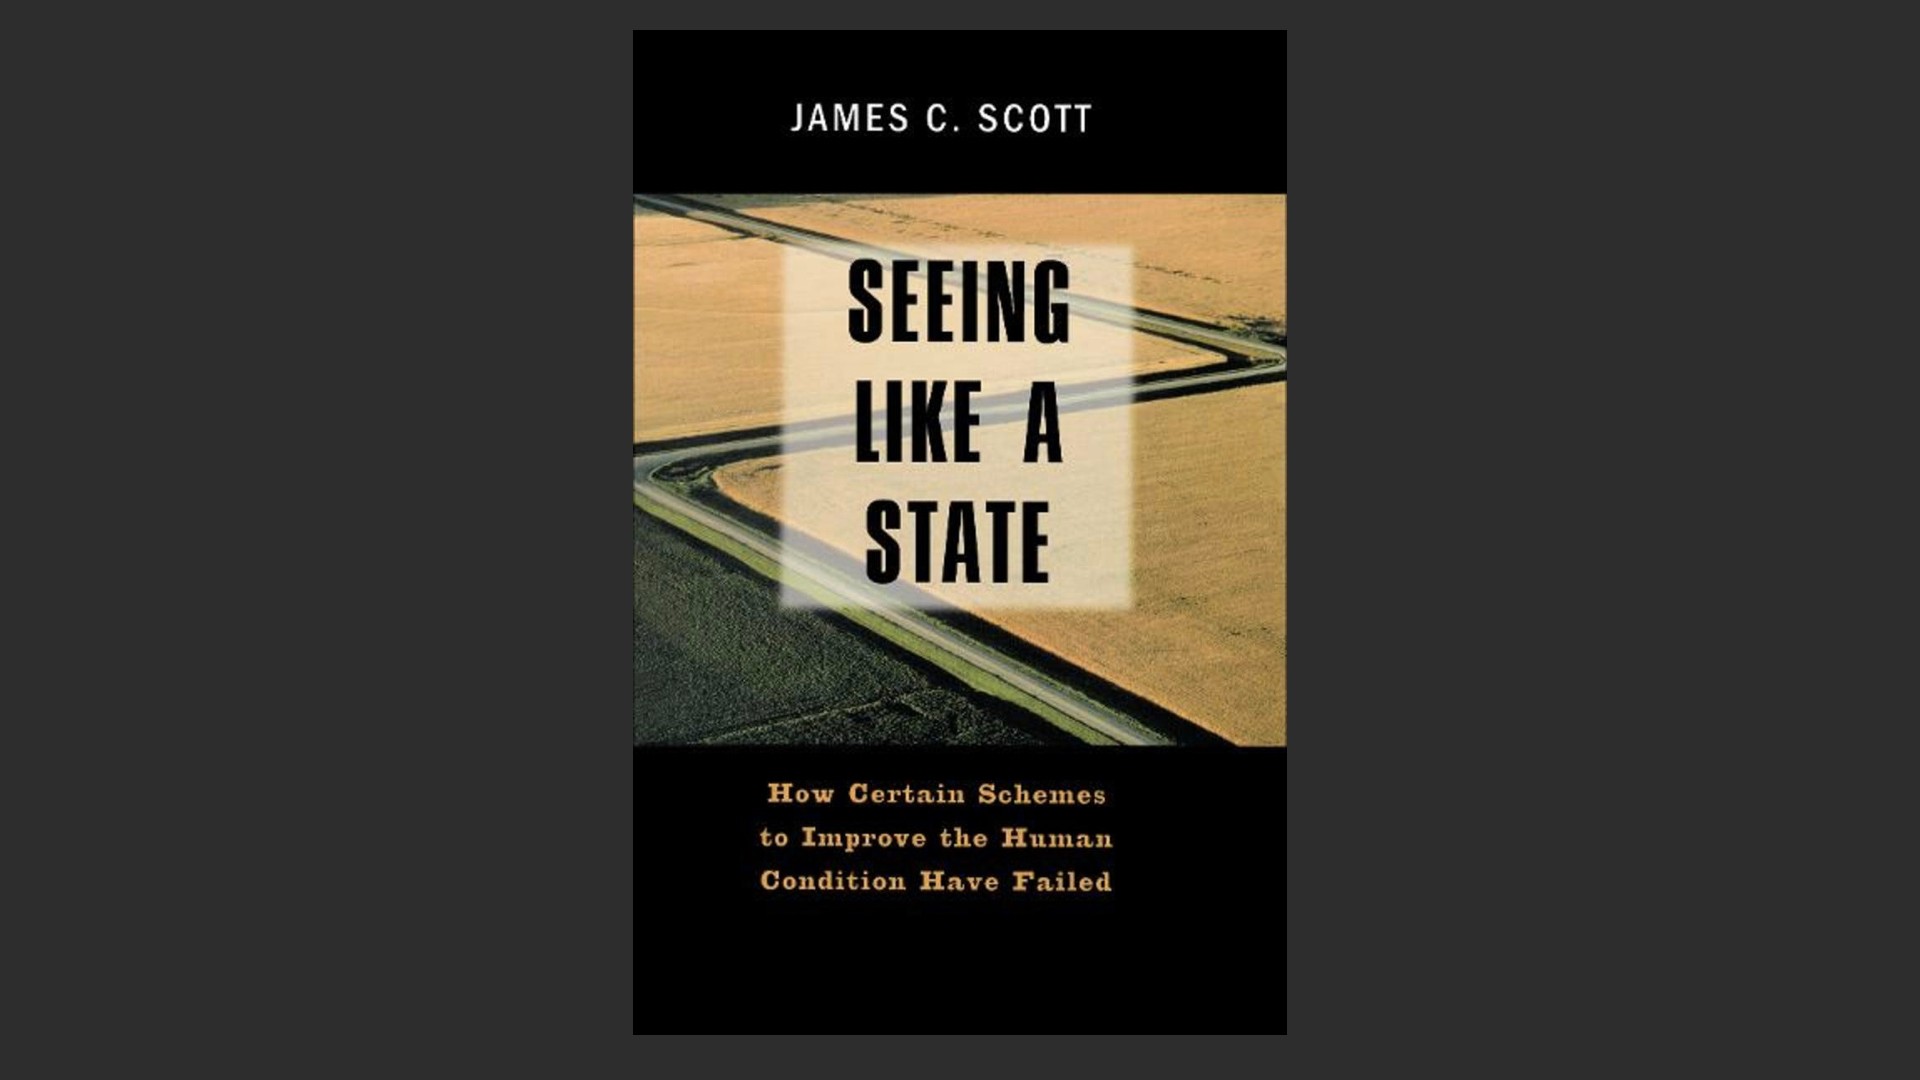 Cover of James C's Seeing Like a State.